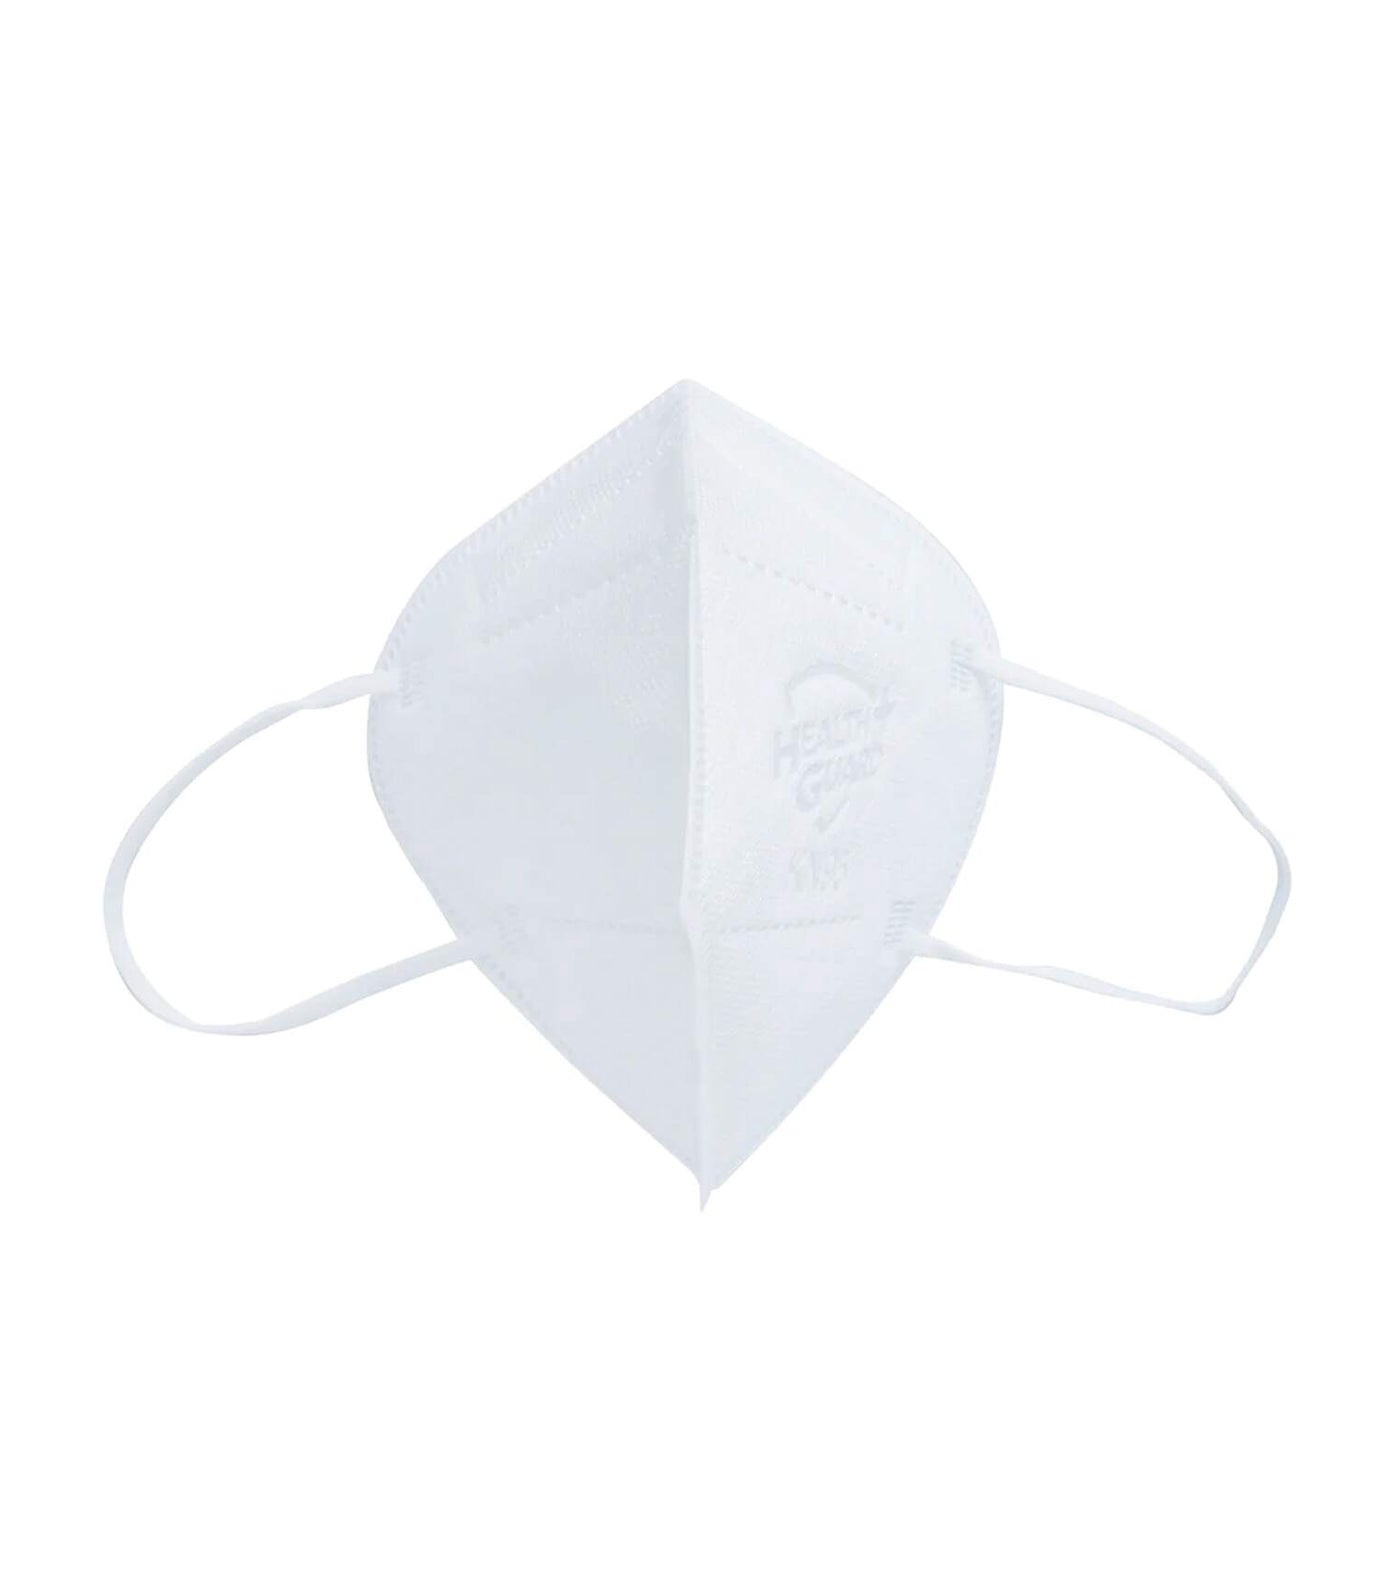 Five-Piece Non-Medical Adult KN95 Face Mask